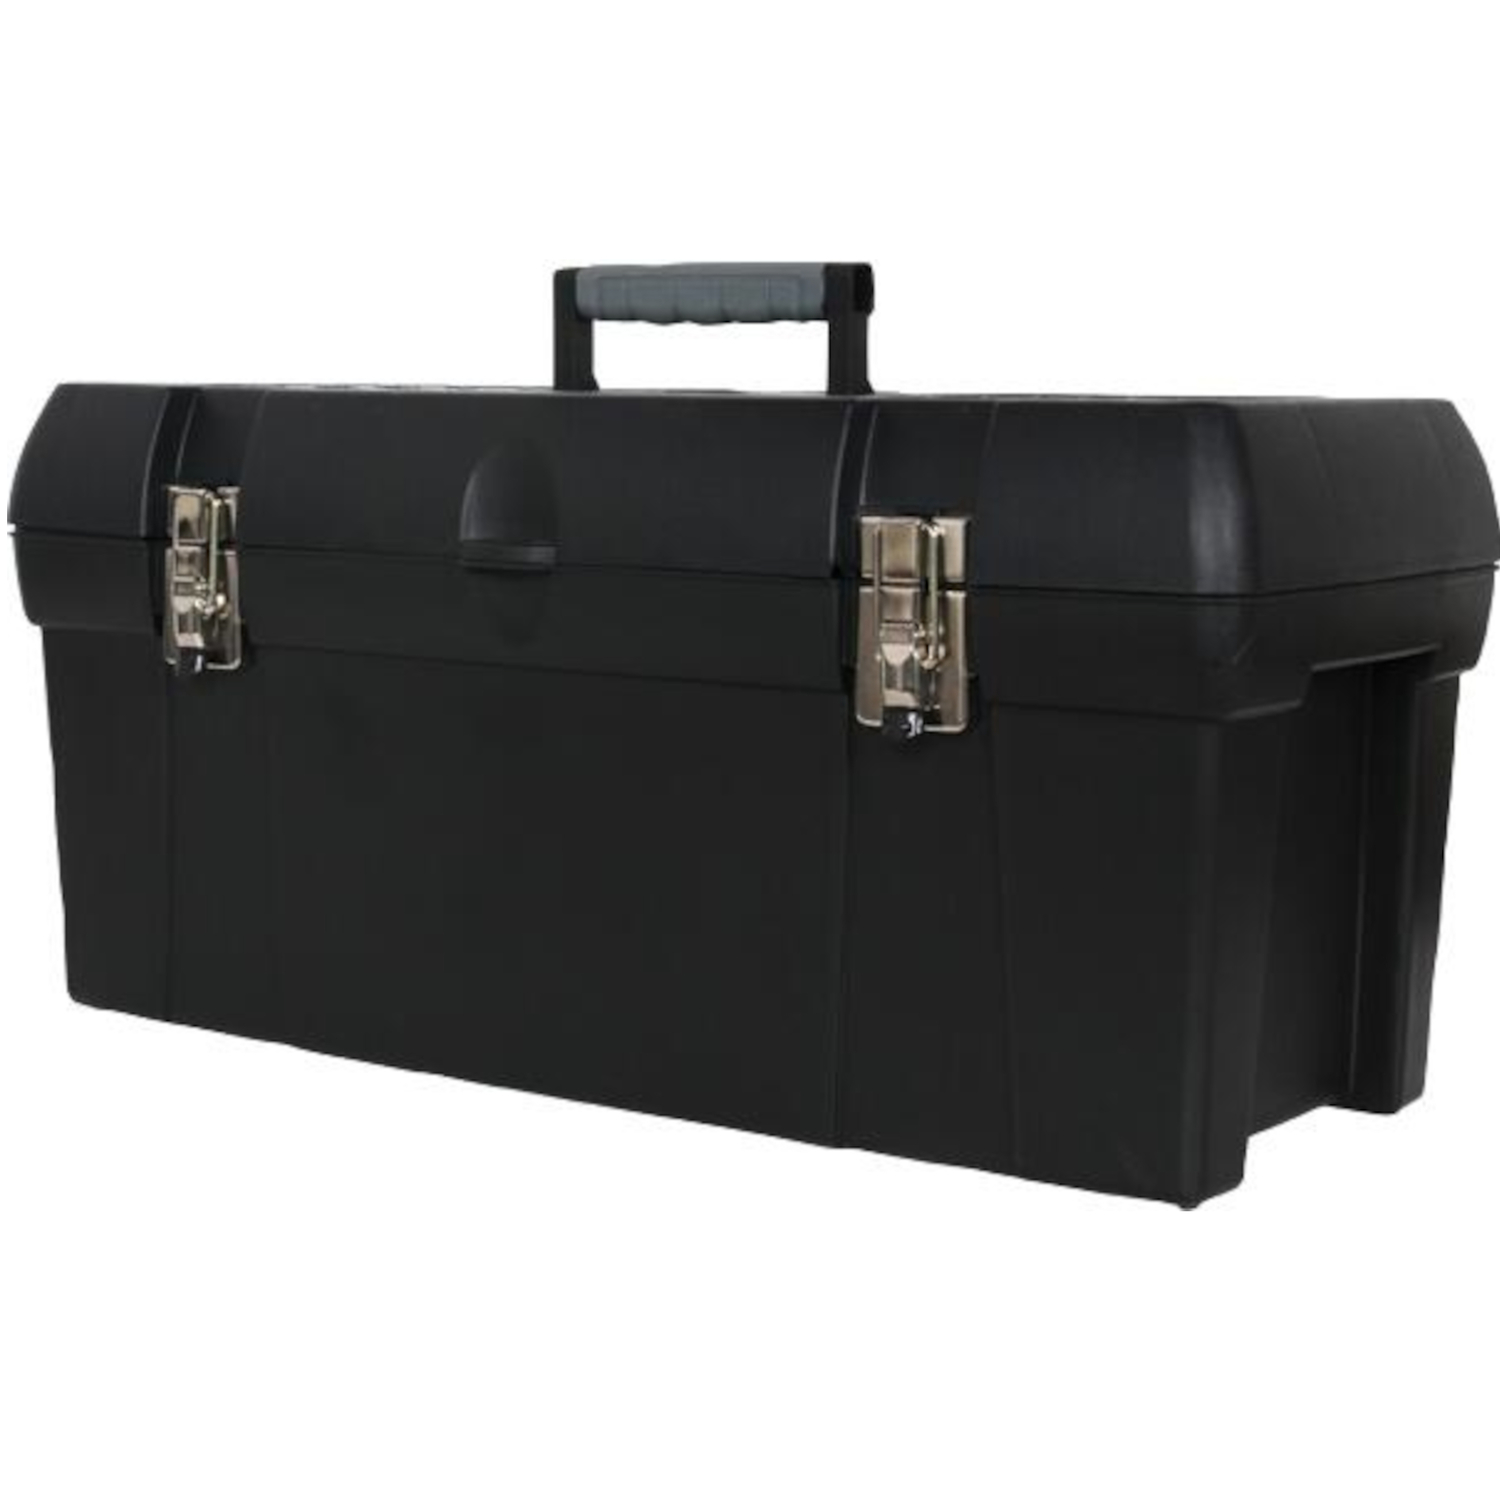 Photos - Tool Box Stanley Series 2000 24 in.  Black/Yellow STST24113 